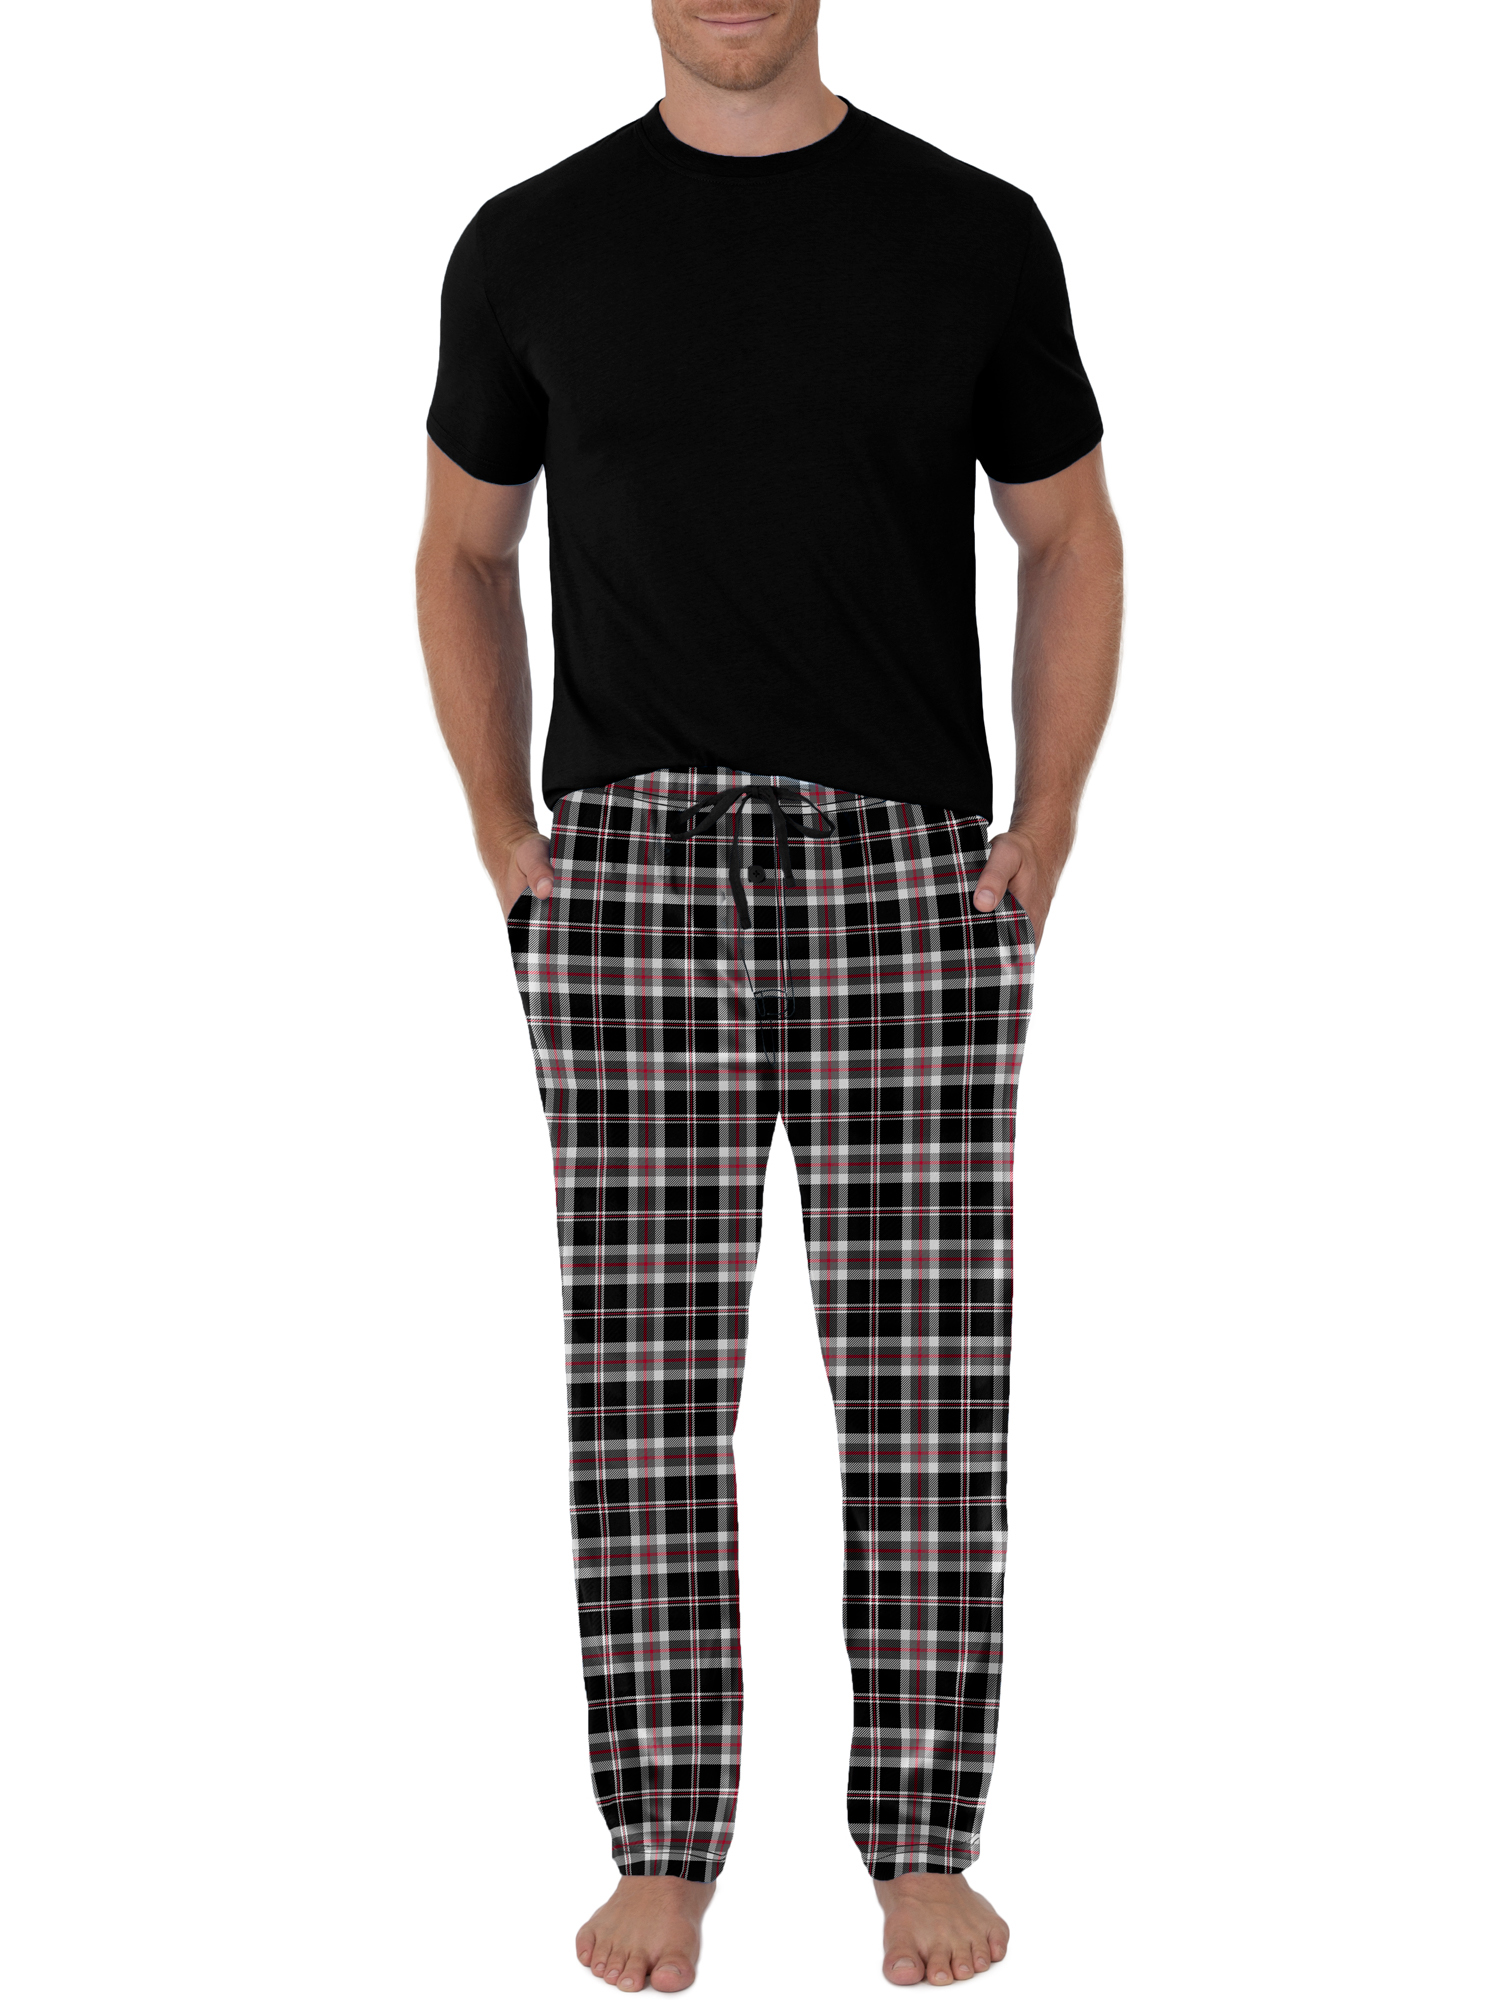 Fruit Of The Loom & Isotoner Men's Pajama Set $10, Robe $15 Walmart + Christmas/Holiday, The Office, & Friends Sale  Sets